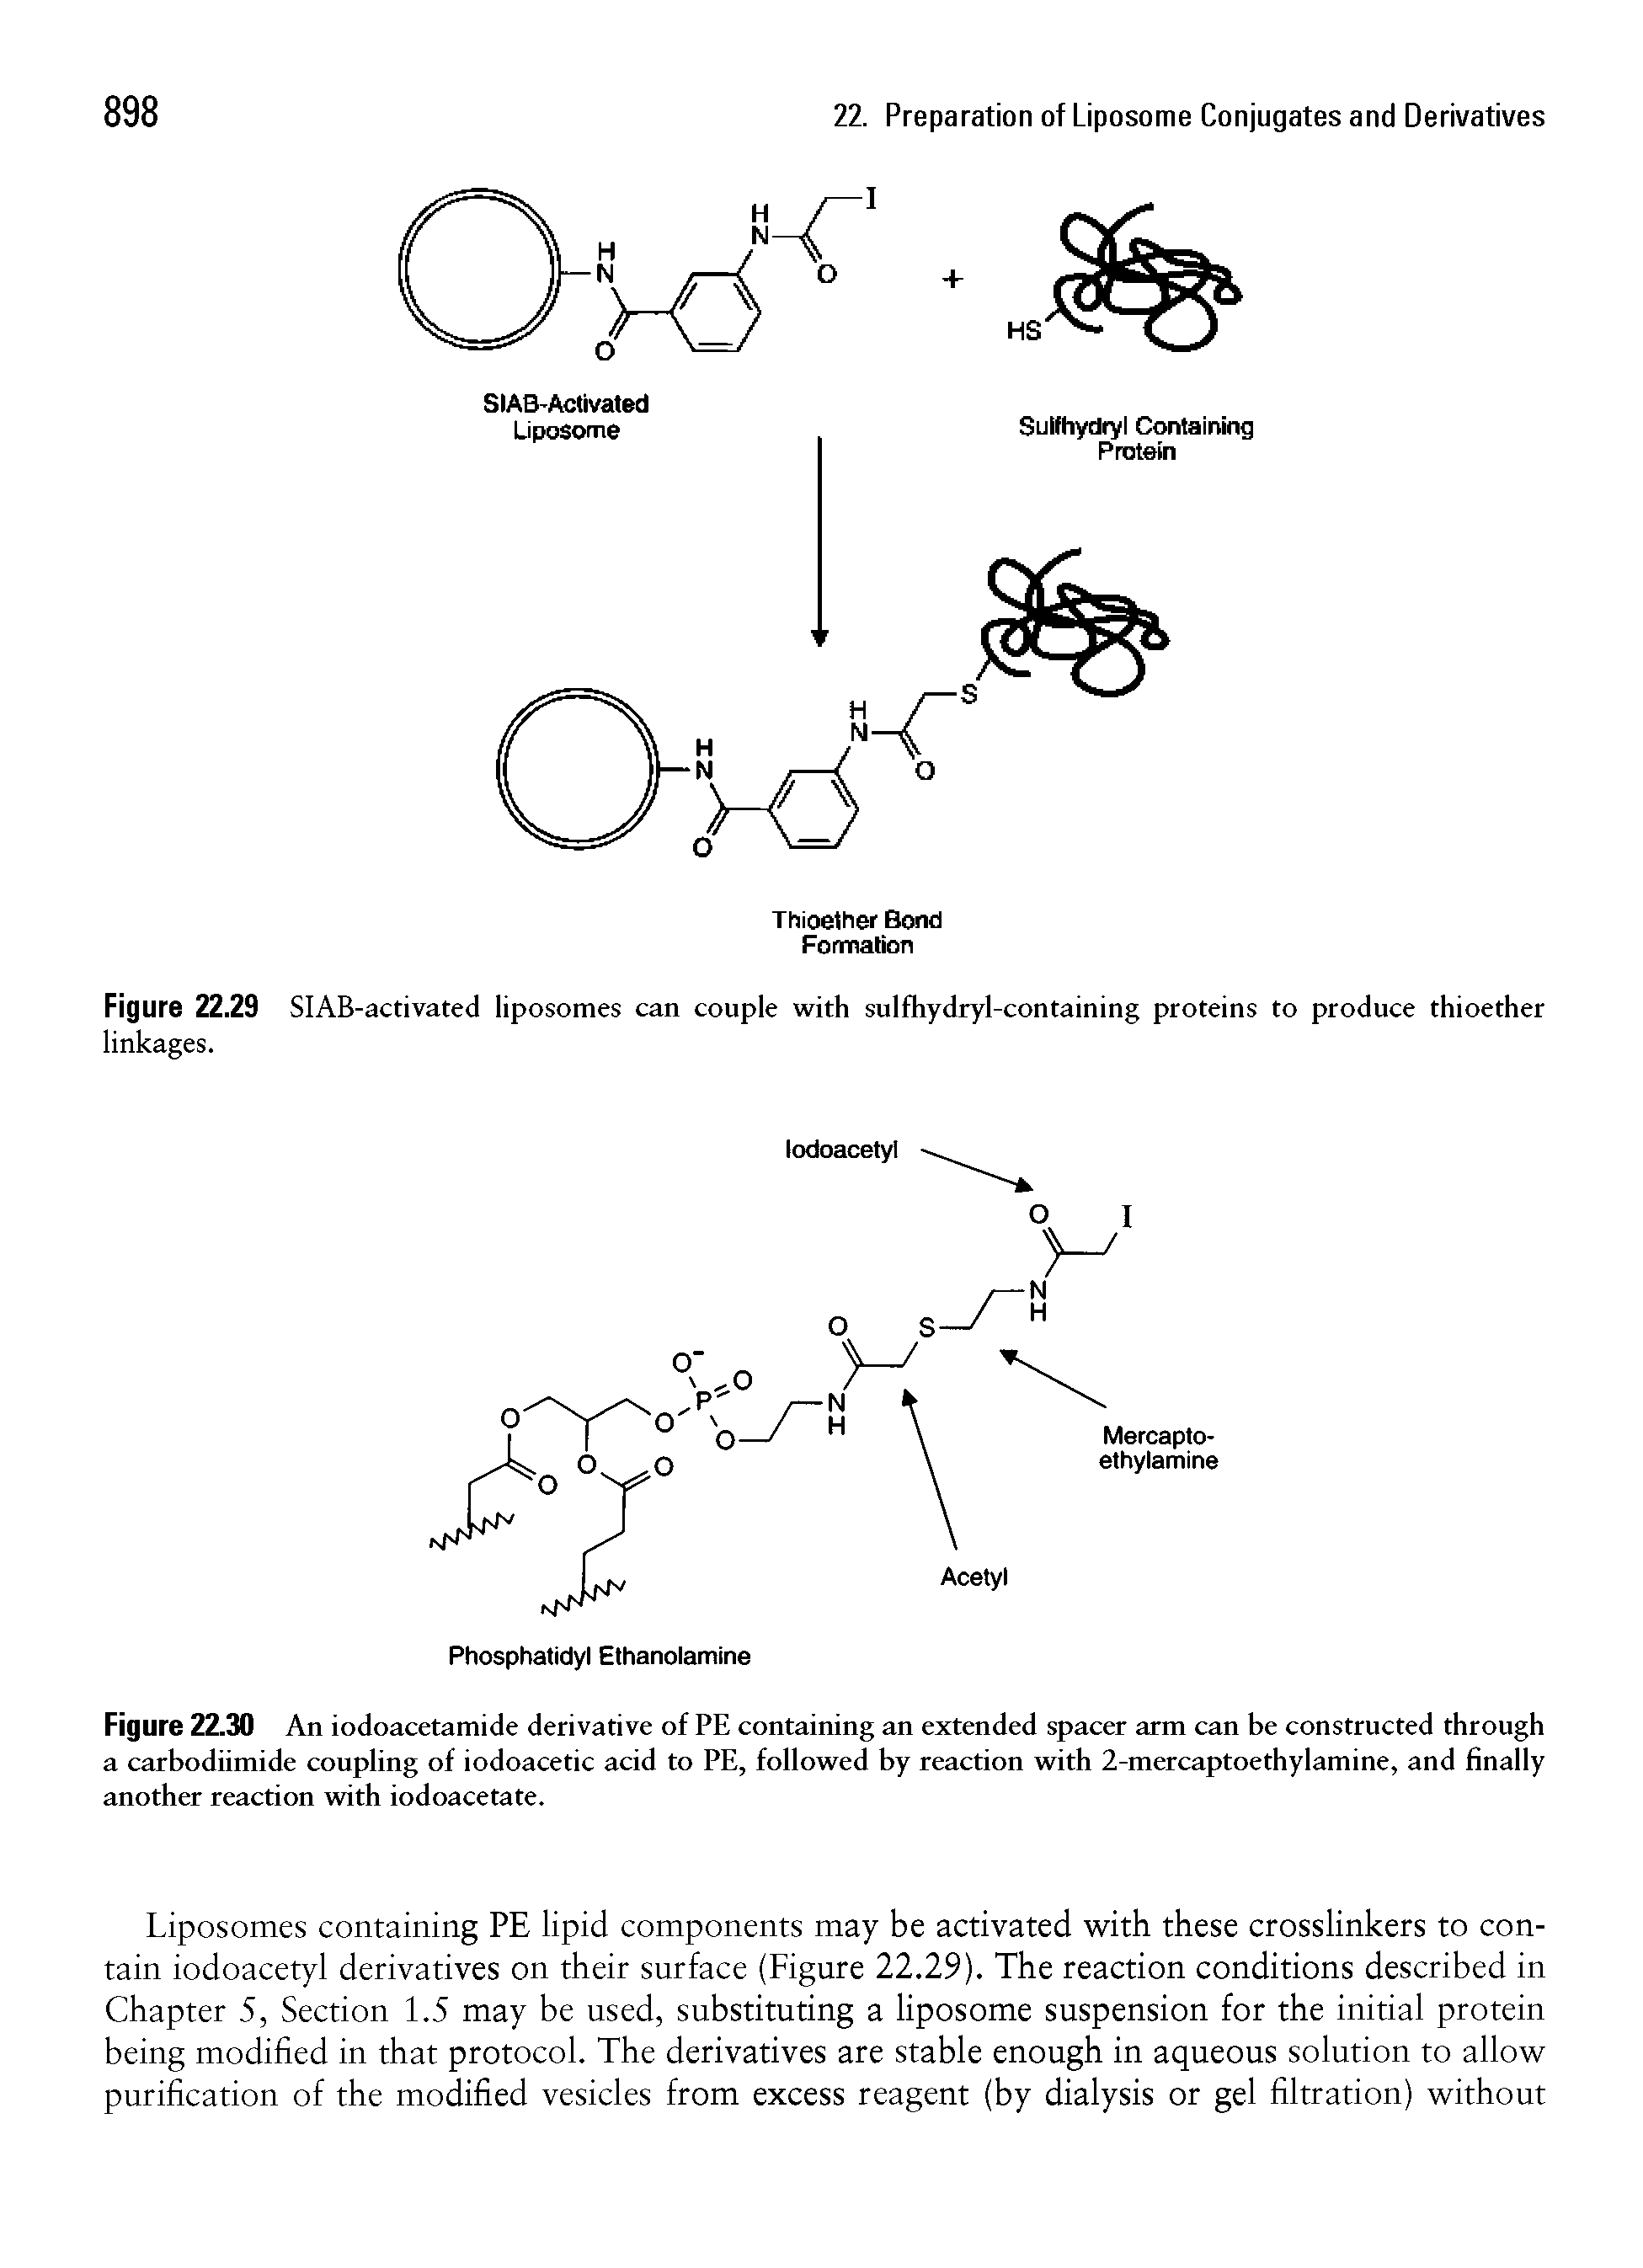 Figure 22.30 An iodoacetamide derivative of PE containing an extended spacer arm can be constructed through a carbodiimide coupling of iodoacetic acid to PE, followed by reaction with 2-mercaptoethylamine, and finally another reaction with iodoacetate.